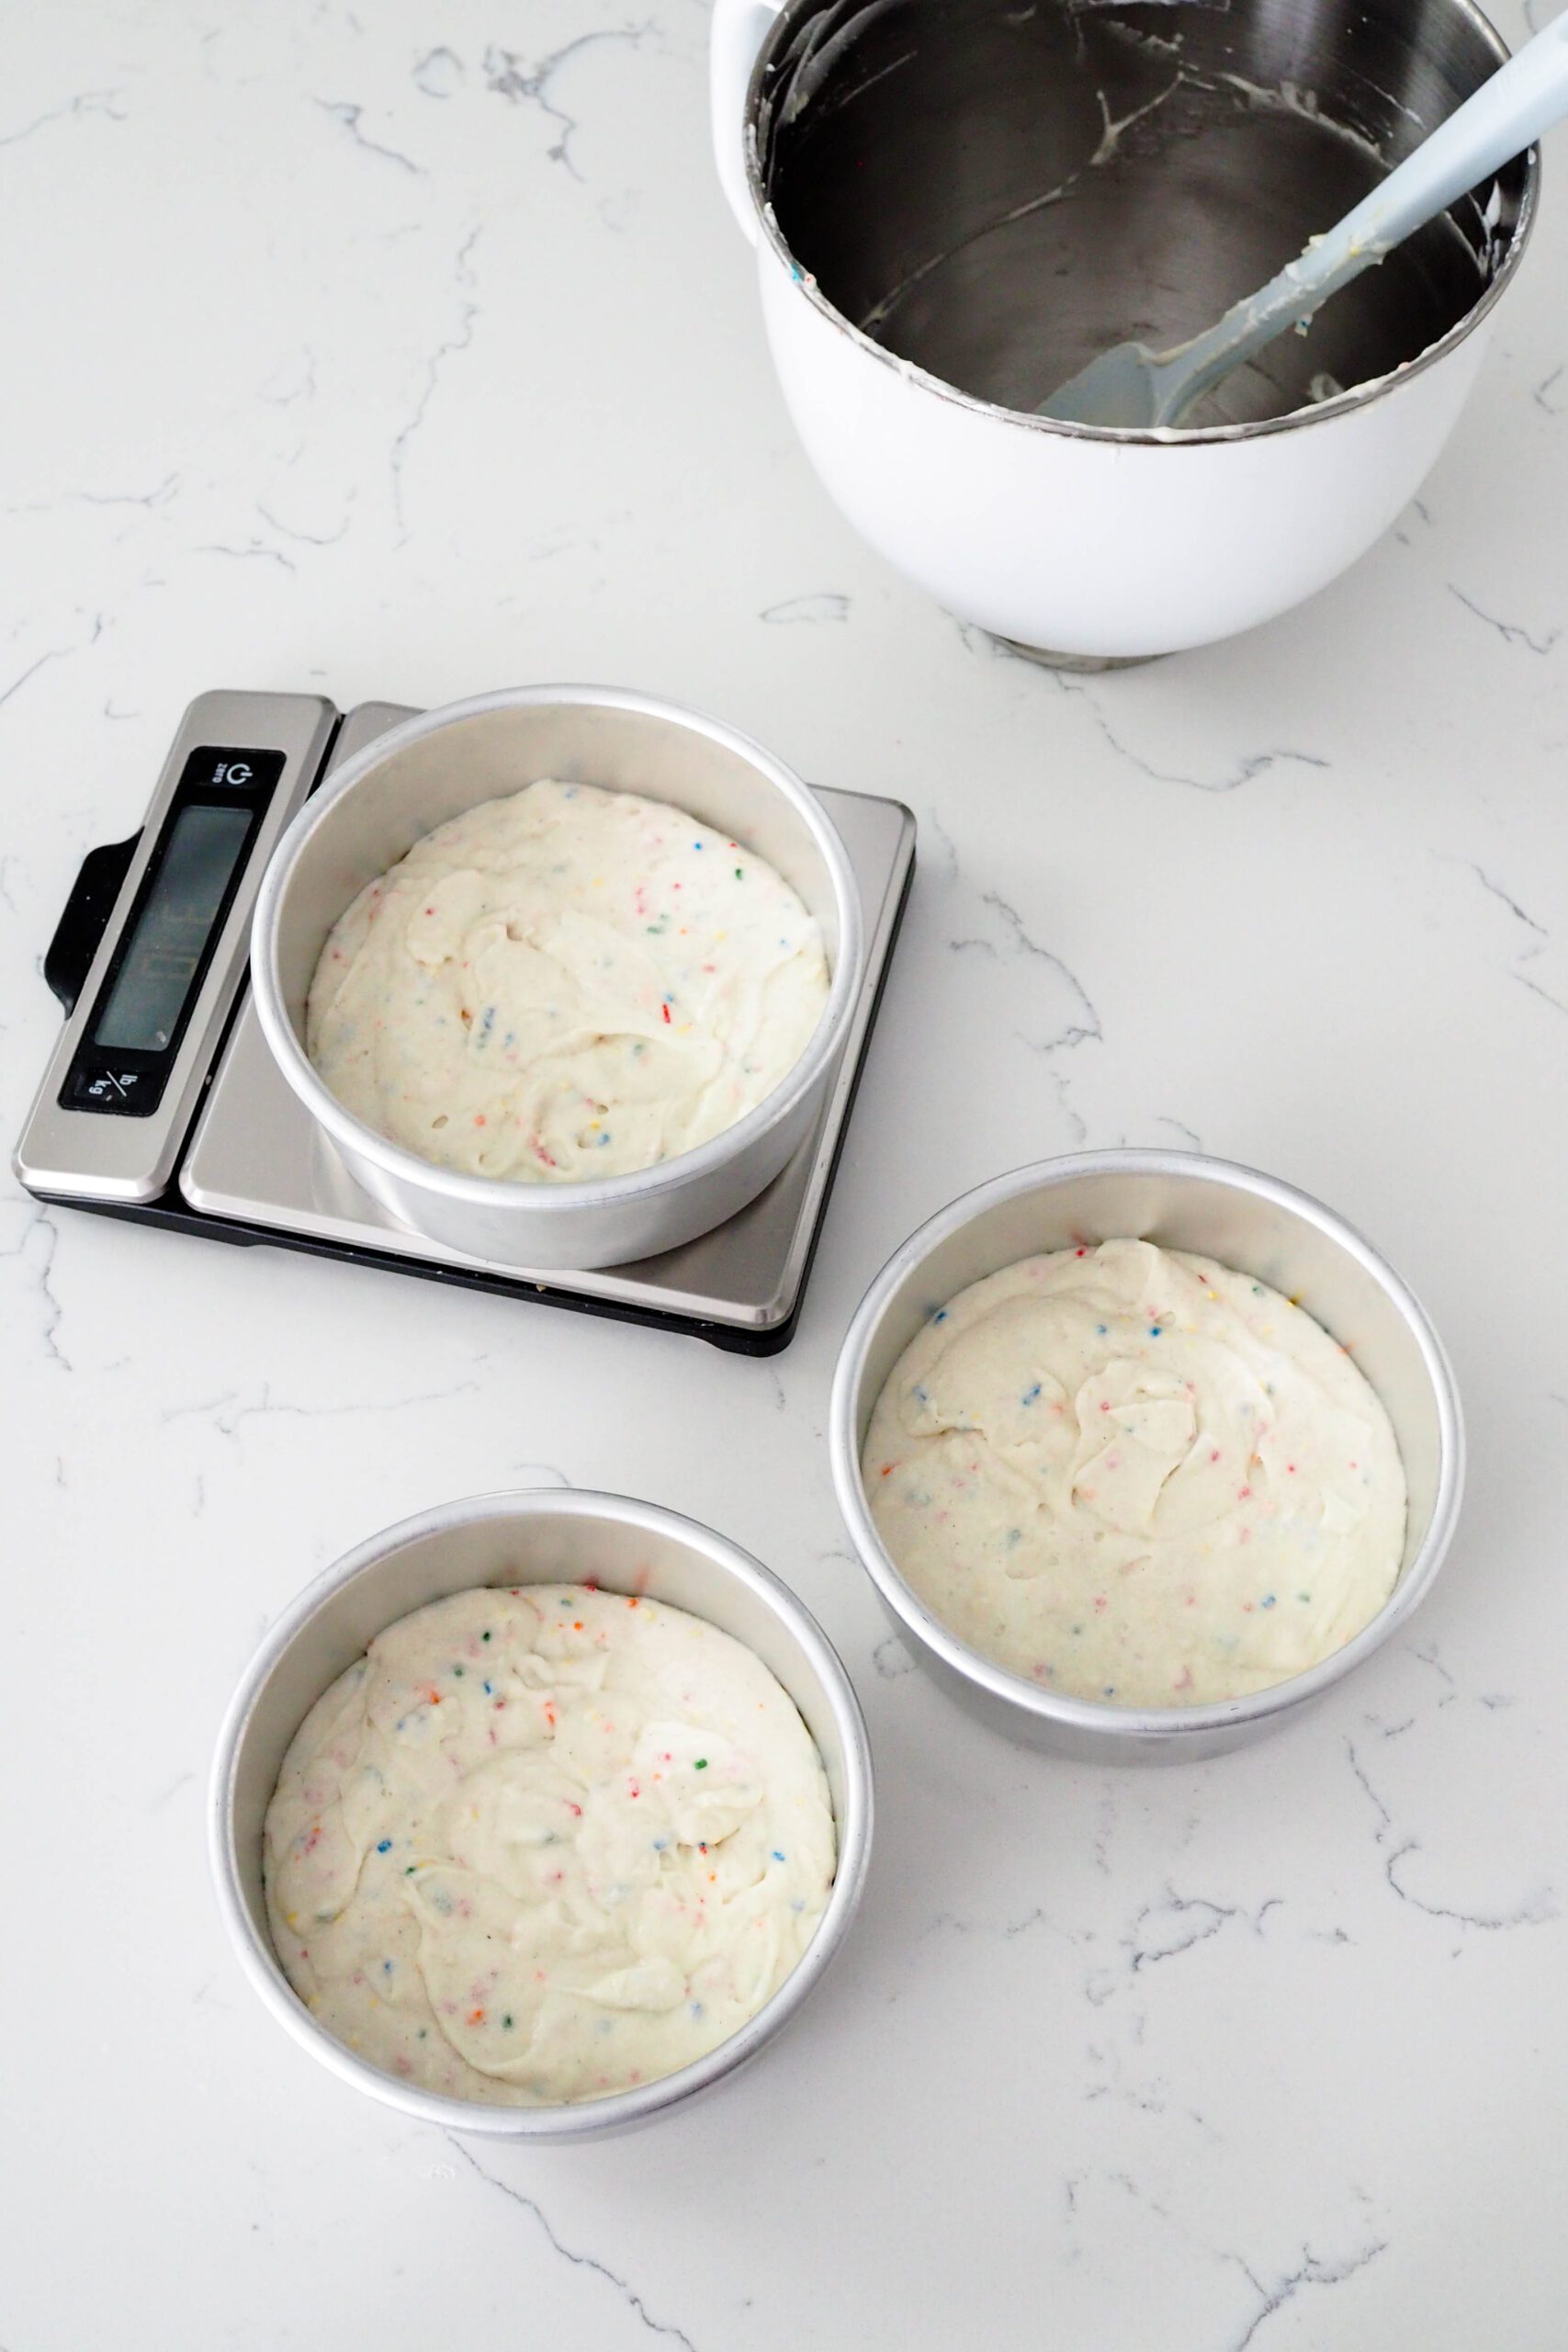 Three cake pans are filled with sprinkle cake batter. One rests on a digital scale.